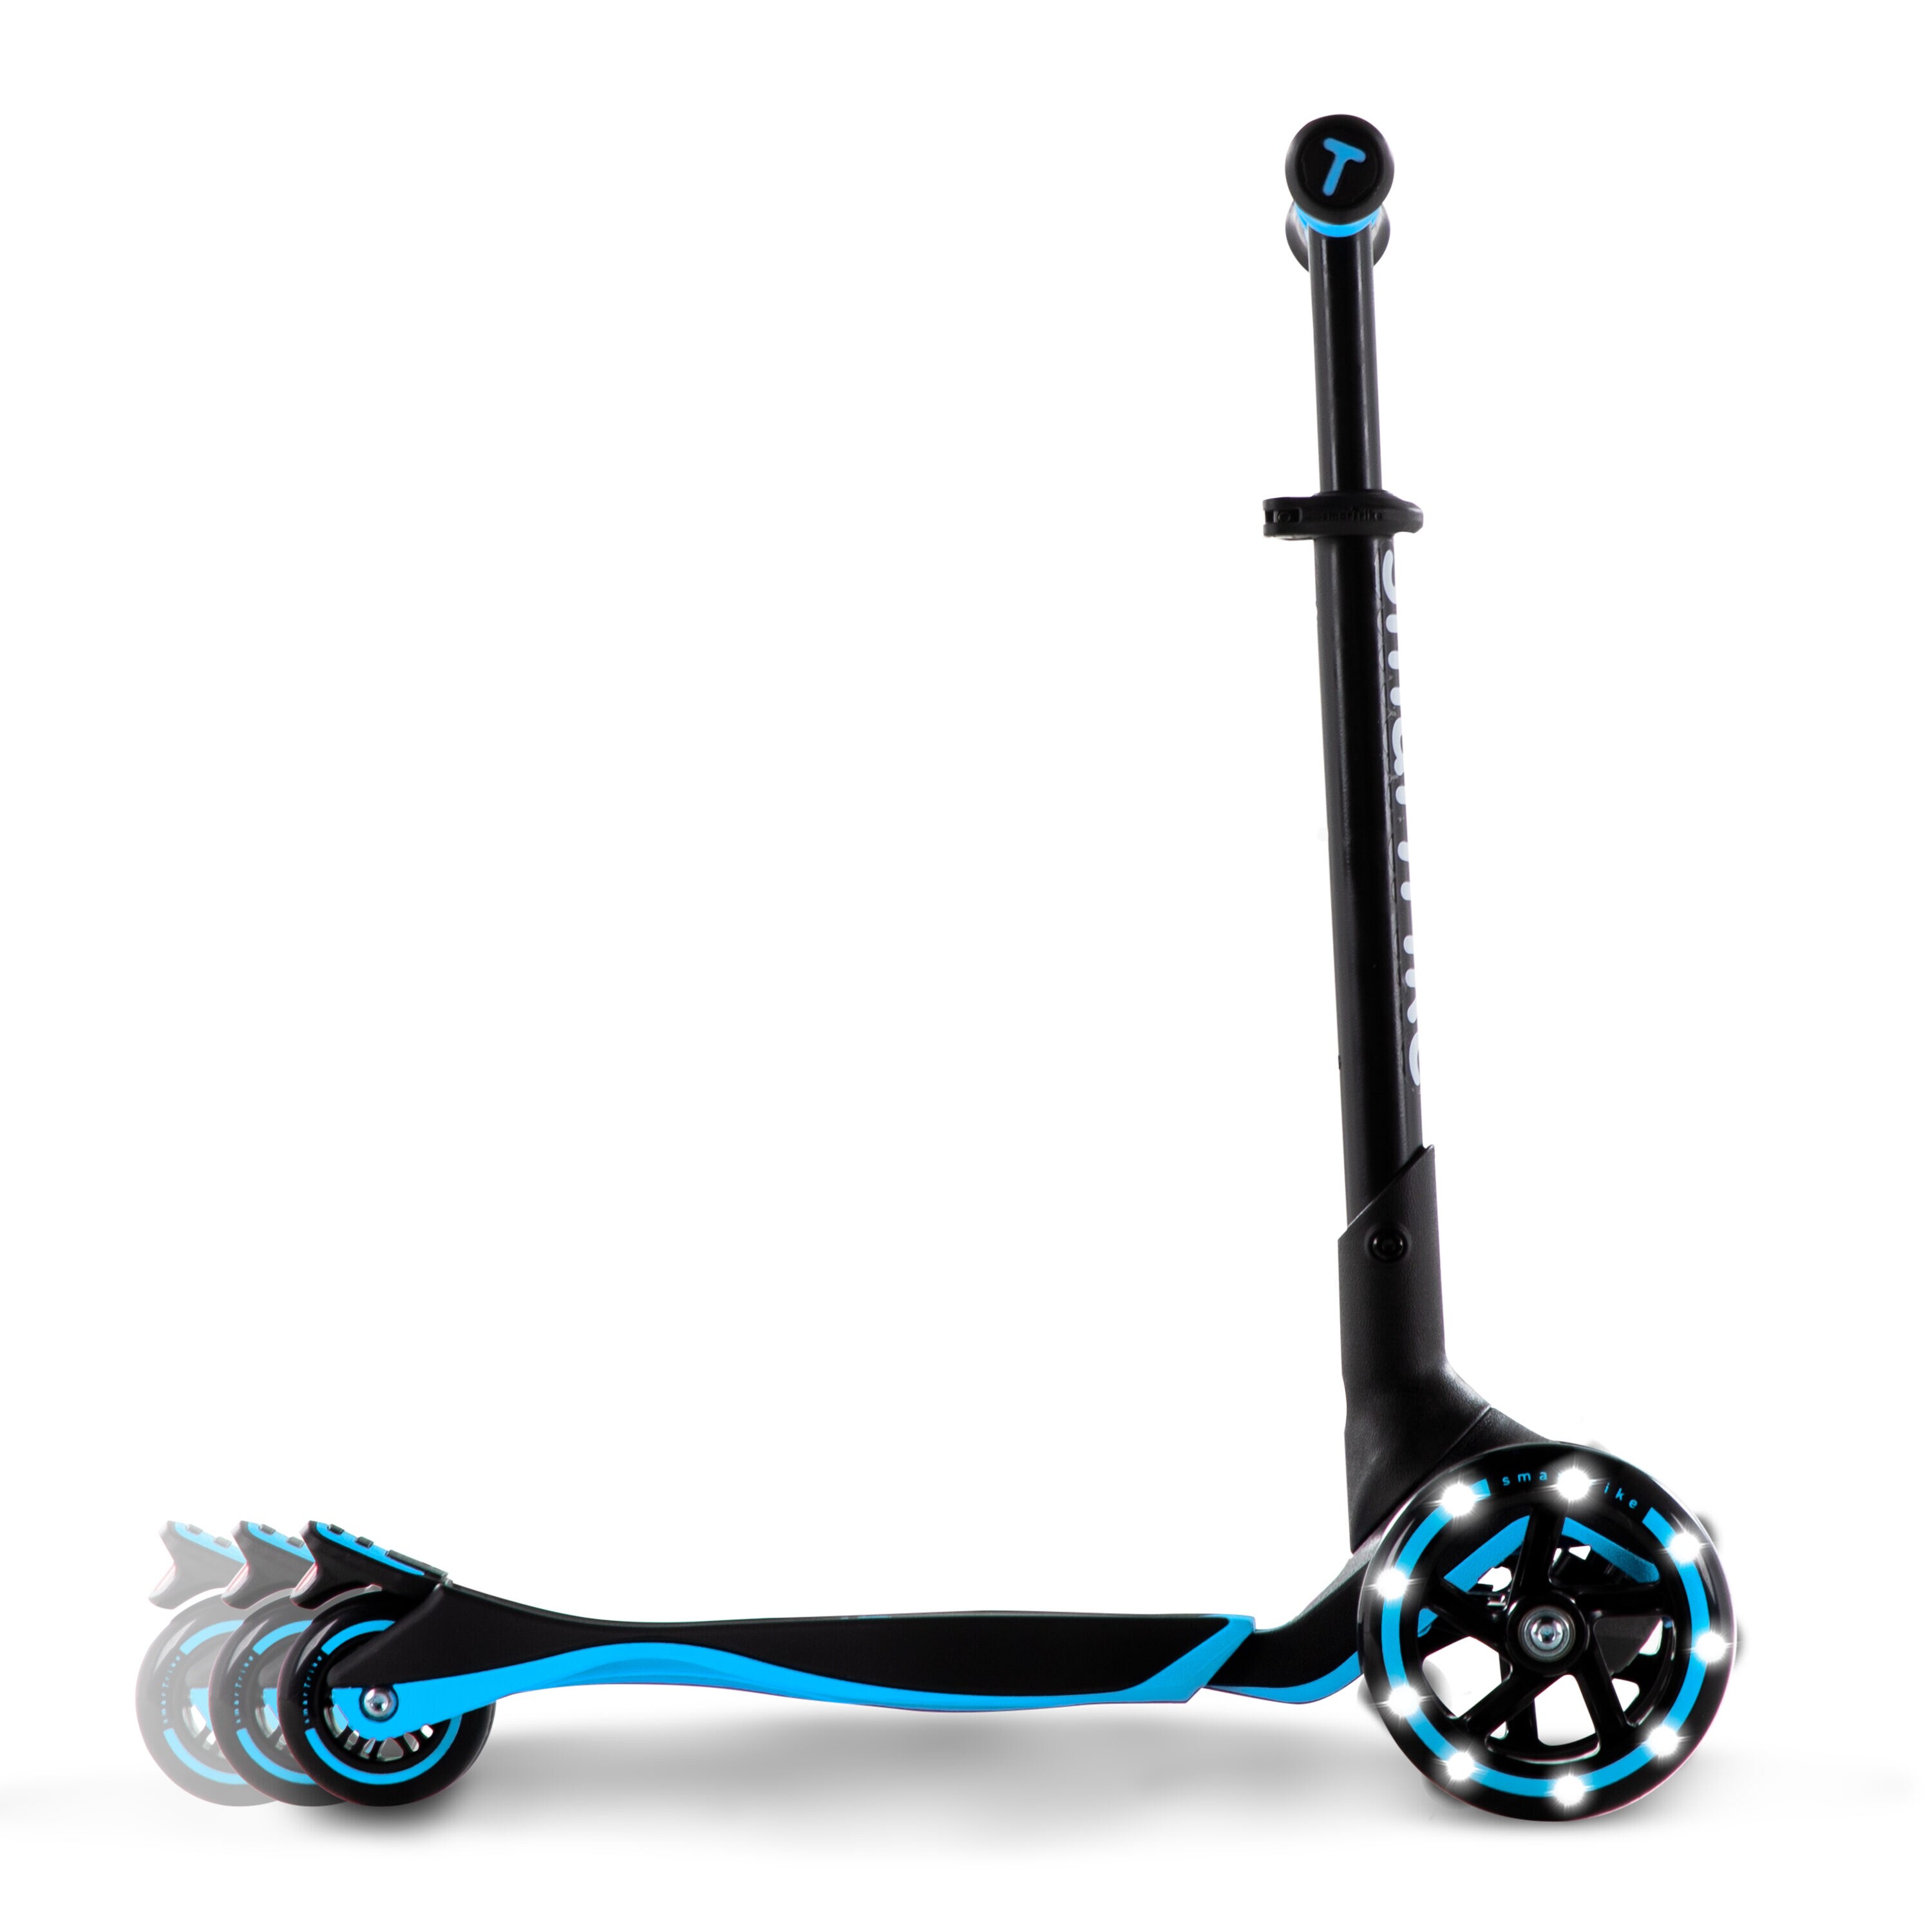 Smartrike Xtend 3 In 1 Scooter at Lowes.com